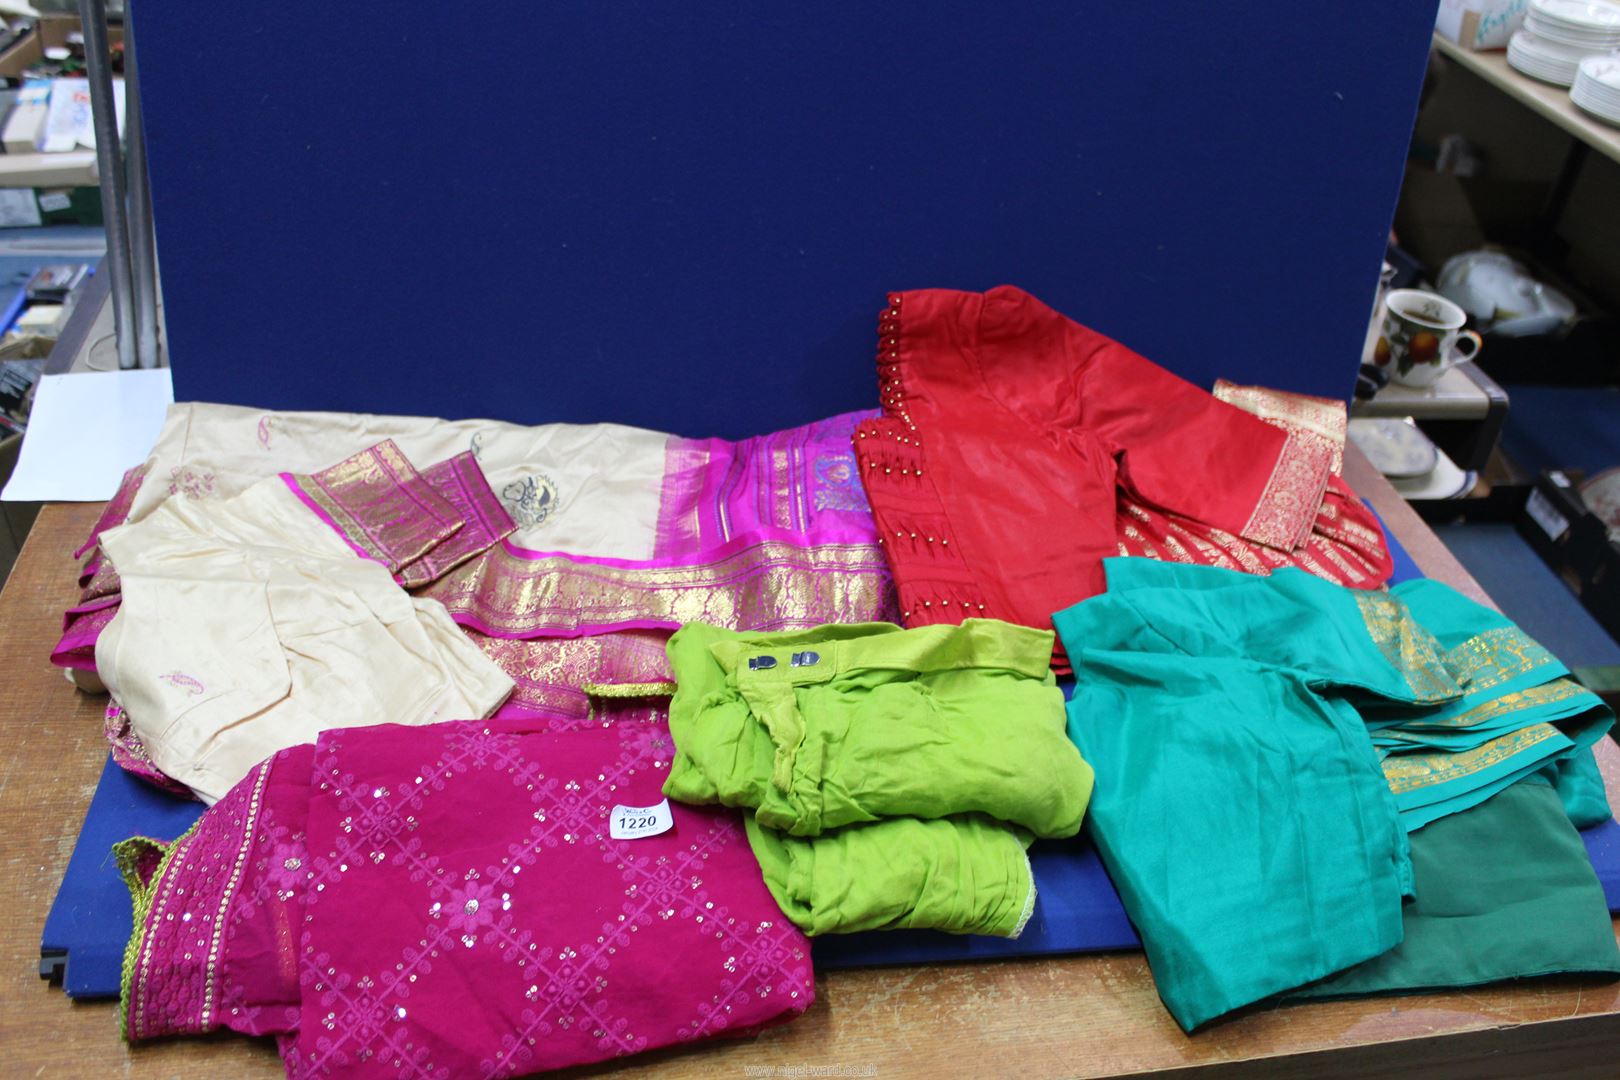 A quantity of saris, coordinating tops, etc., red with gold thread and pink with sequins, etc.